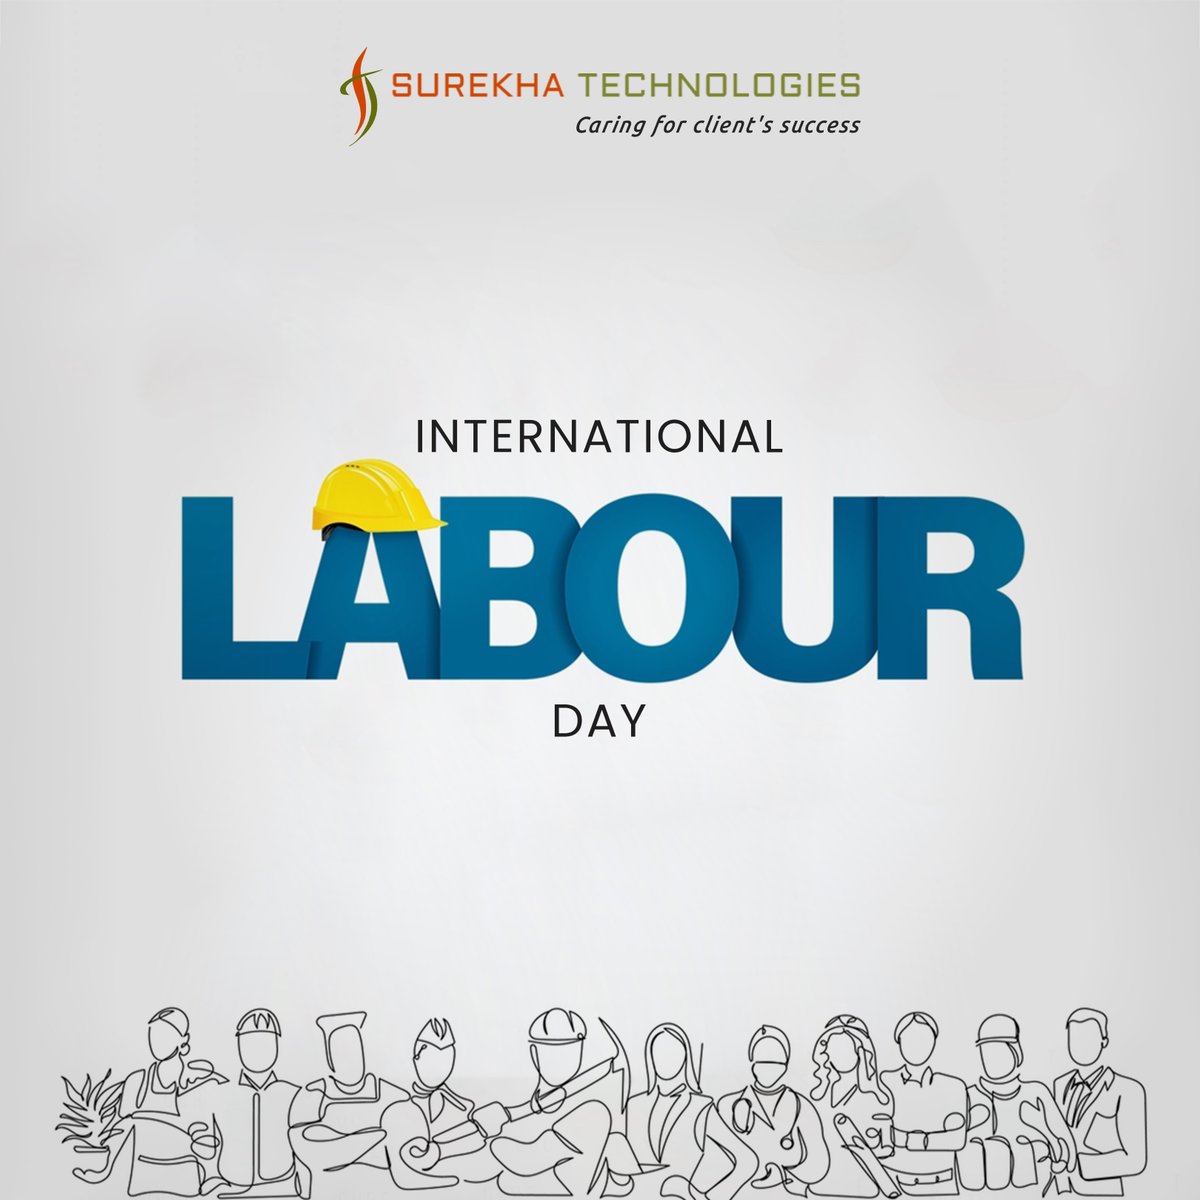 Let's take a moment to honor and appreciate the hard work, dedication, and contributions of workers worldwide. Happy #InternationalLaborDay to all the hardworking individuals out there! #LaborDay #LabourDay #InternationalLabourDay #LabourRights #ThankYouWorkers #Surekhatech